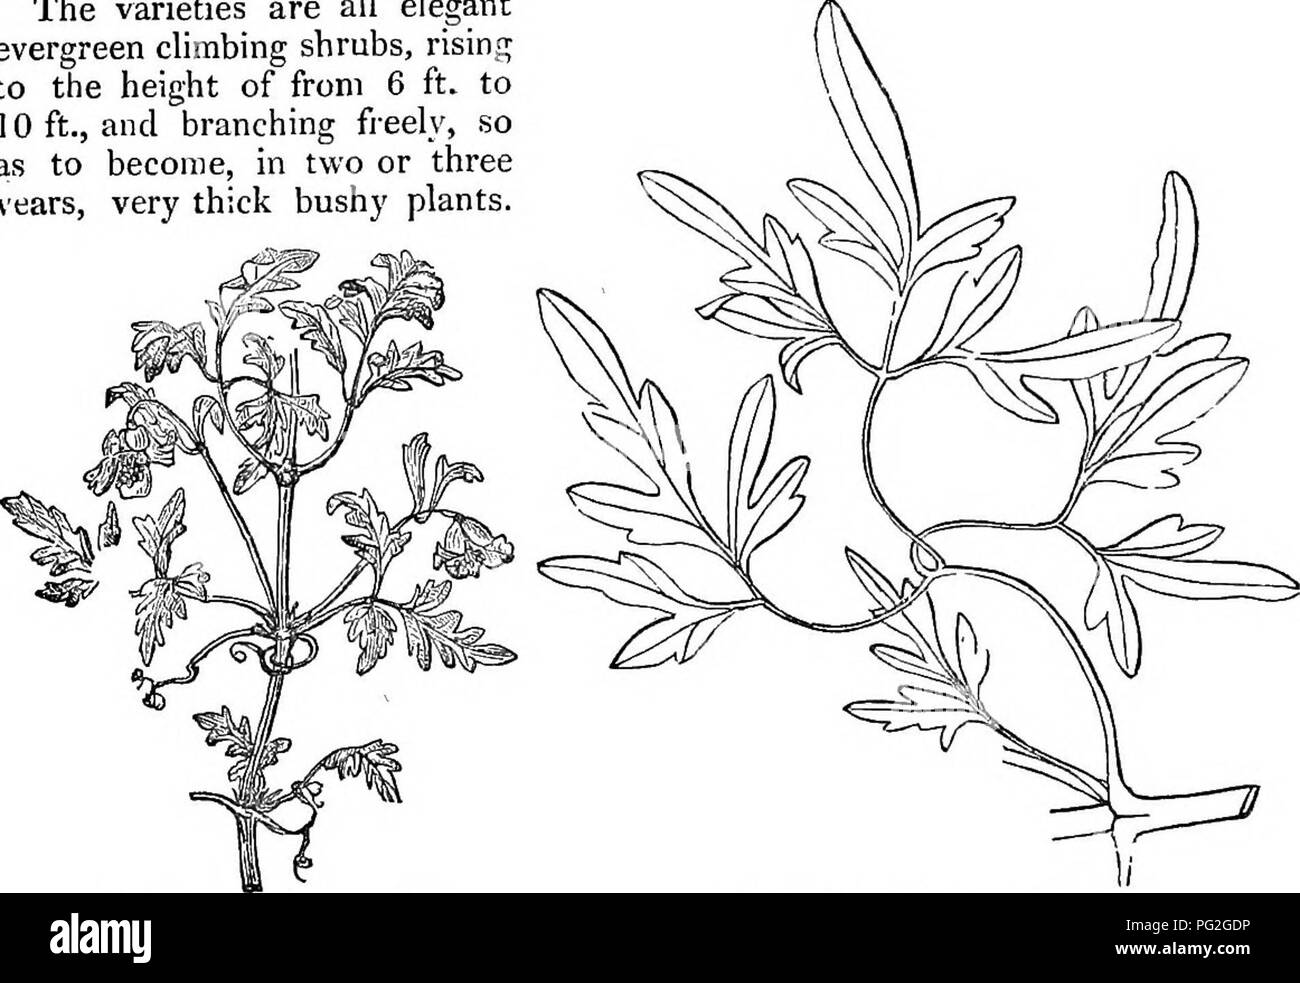 . Trees and shrubs : an abridgment of the Arboretum et fruticetum britannicum : containing the hardy trees and schrubs of Britain, native and foreign, scientifically and popularly described : with their propagation, culture and uses and engravings of nearly all the species. Trees; Shrubs; Forests and forestry. C. cirrhbsa angusdf6]ia SO. Clematis ciTThdsapedicellftta, species. S- C. 6'. 3 angustifulia. C. bale- ariea Rich. Bot. Mag. t. 939., and our fig. 21.; C. calycina Ait.; C. polymorpha Hoi-t. Clematite de Mahon, Fr. — The leaves of this variety vary exceedingly, from those shown in fig. 2 Stock Photo